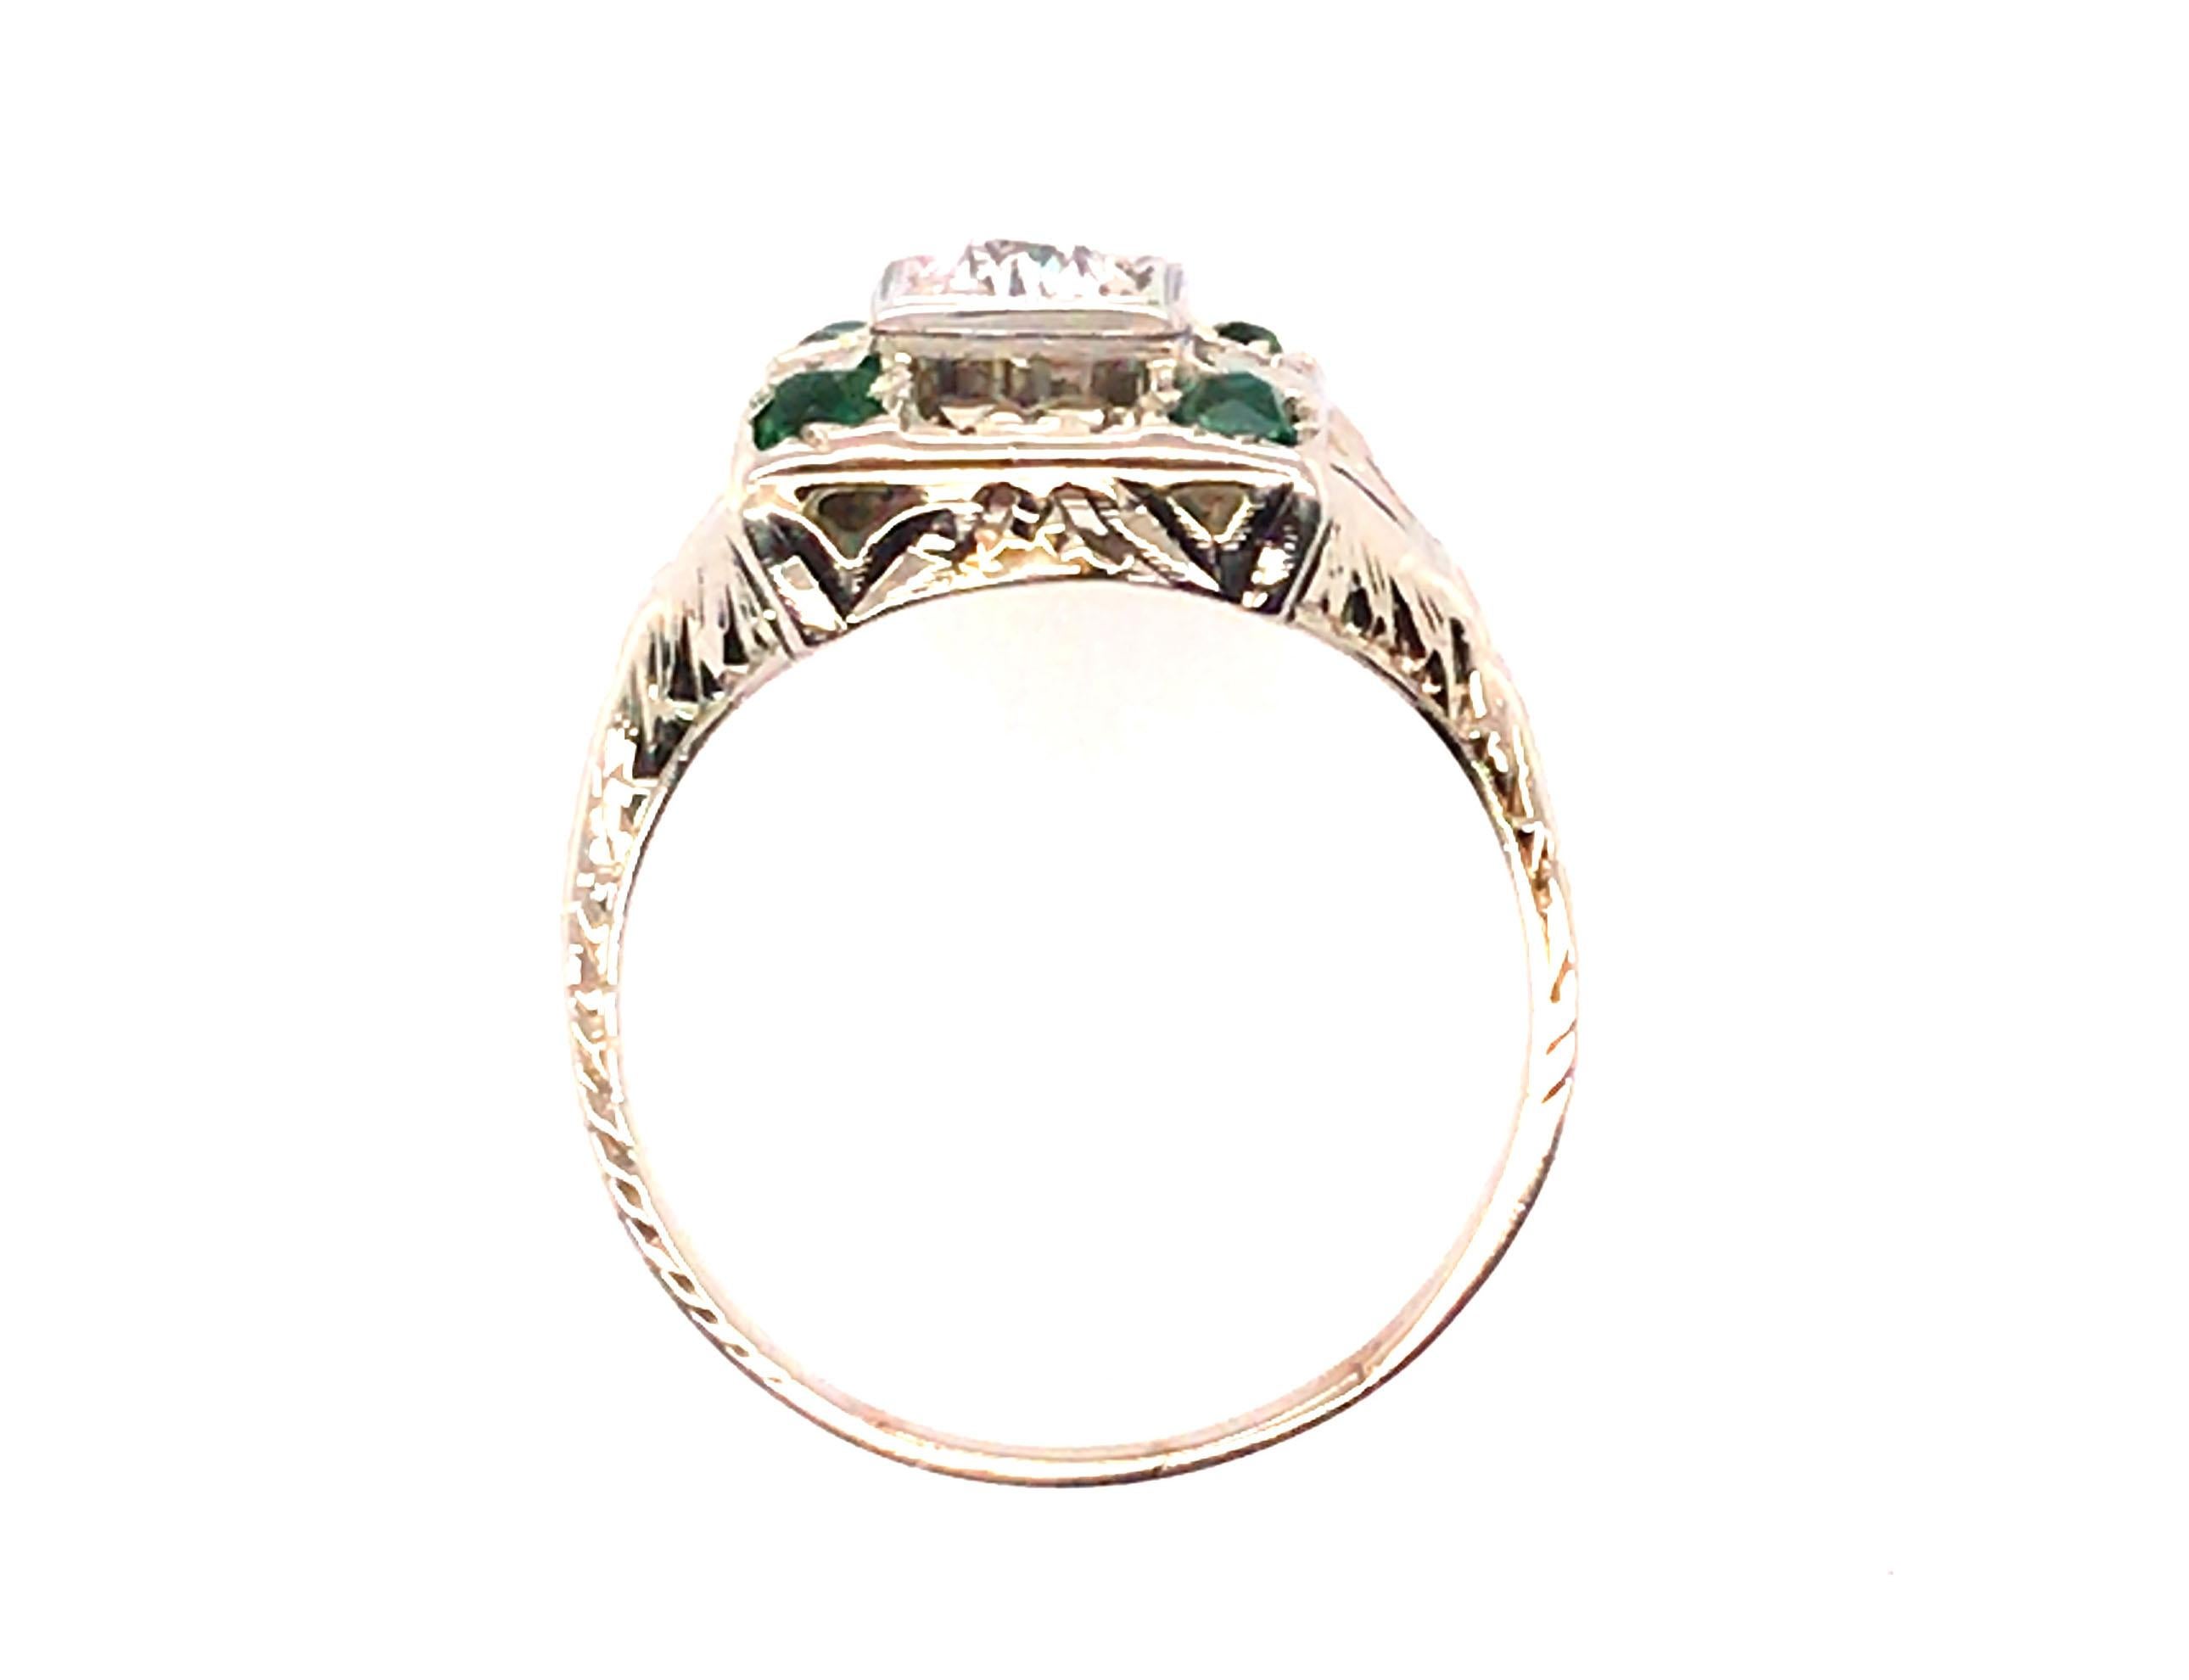 Genuine Original Antique from 1920's Art Deco .60ct Diamond French Cut Emerald Engagement Ring 18K White Gold 


Featuring a Stunning .25ct D-F/SI1 Genuine Old European Cut Natural Diamond Center

Genuine Belais Bros Ring

The Original Name in White